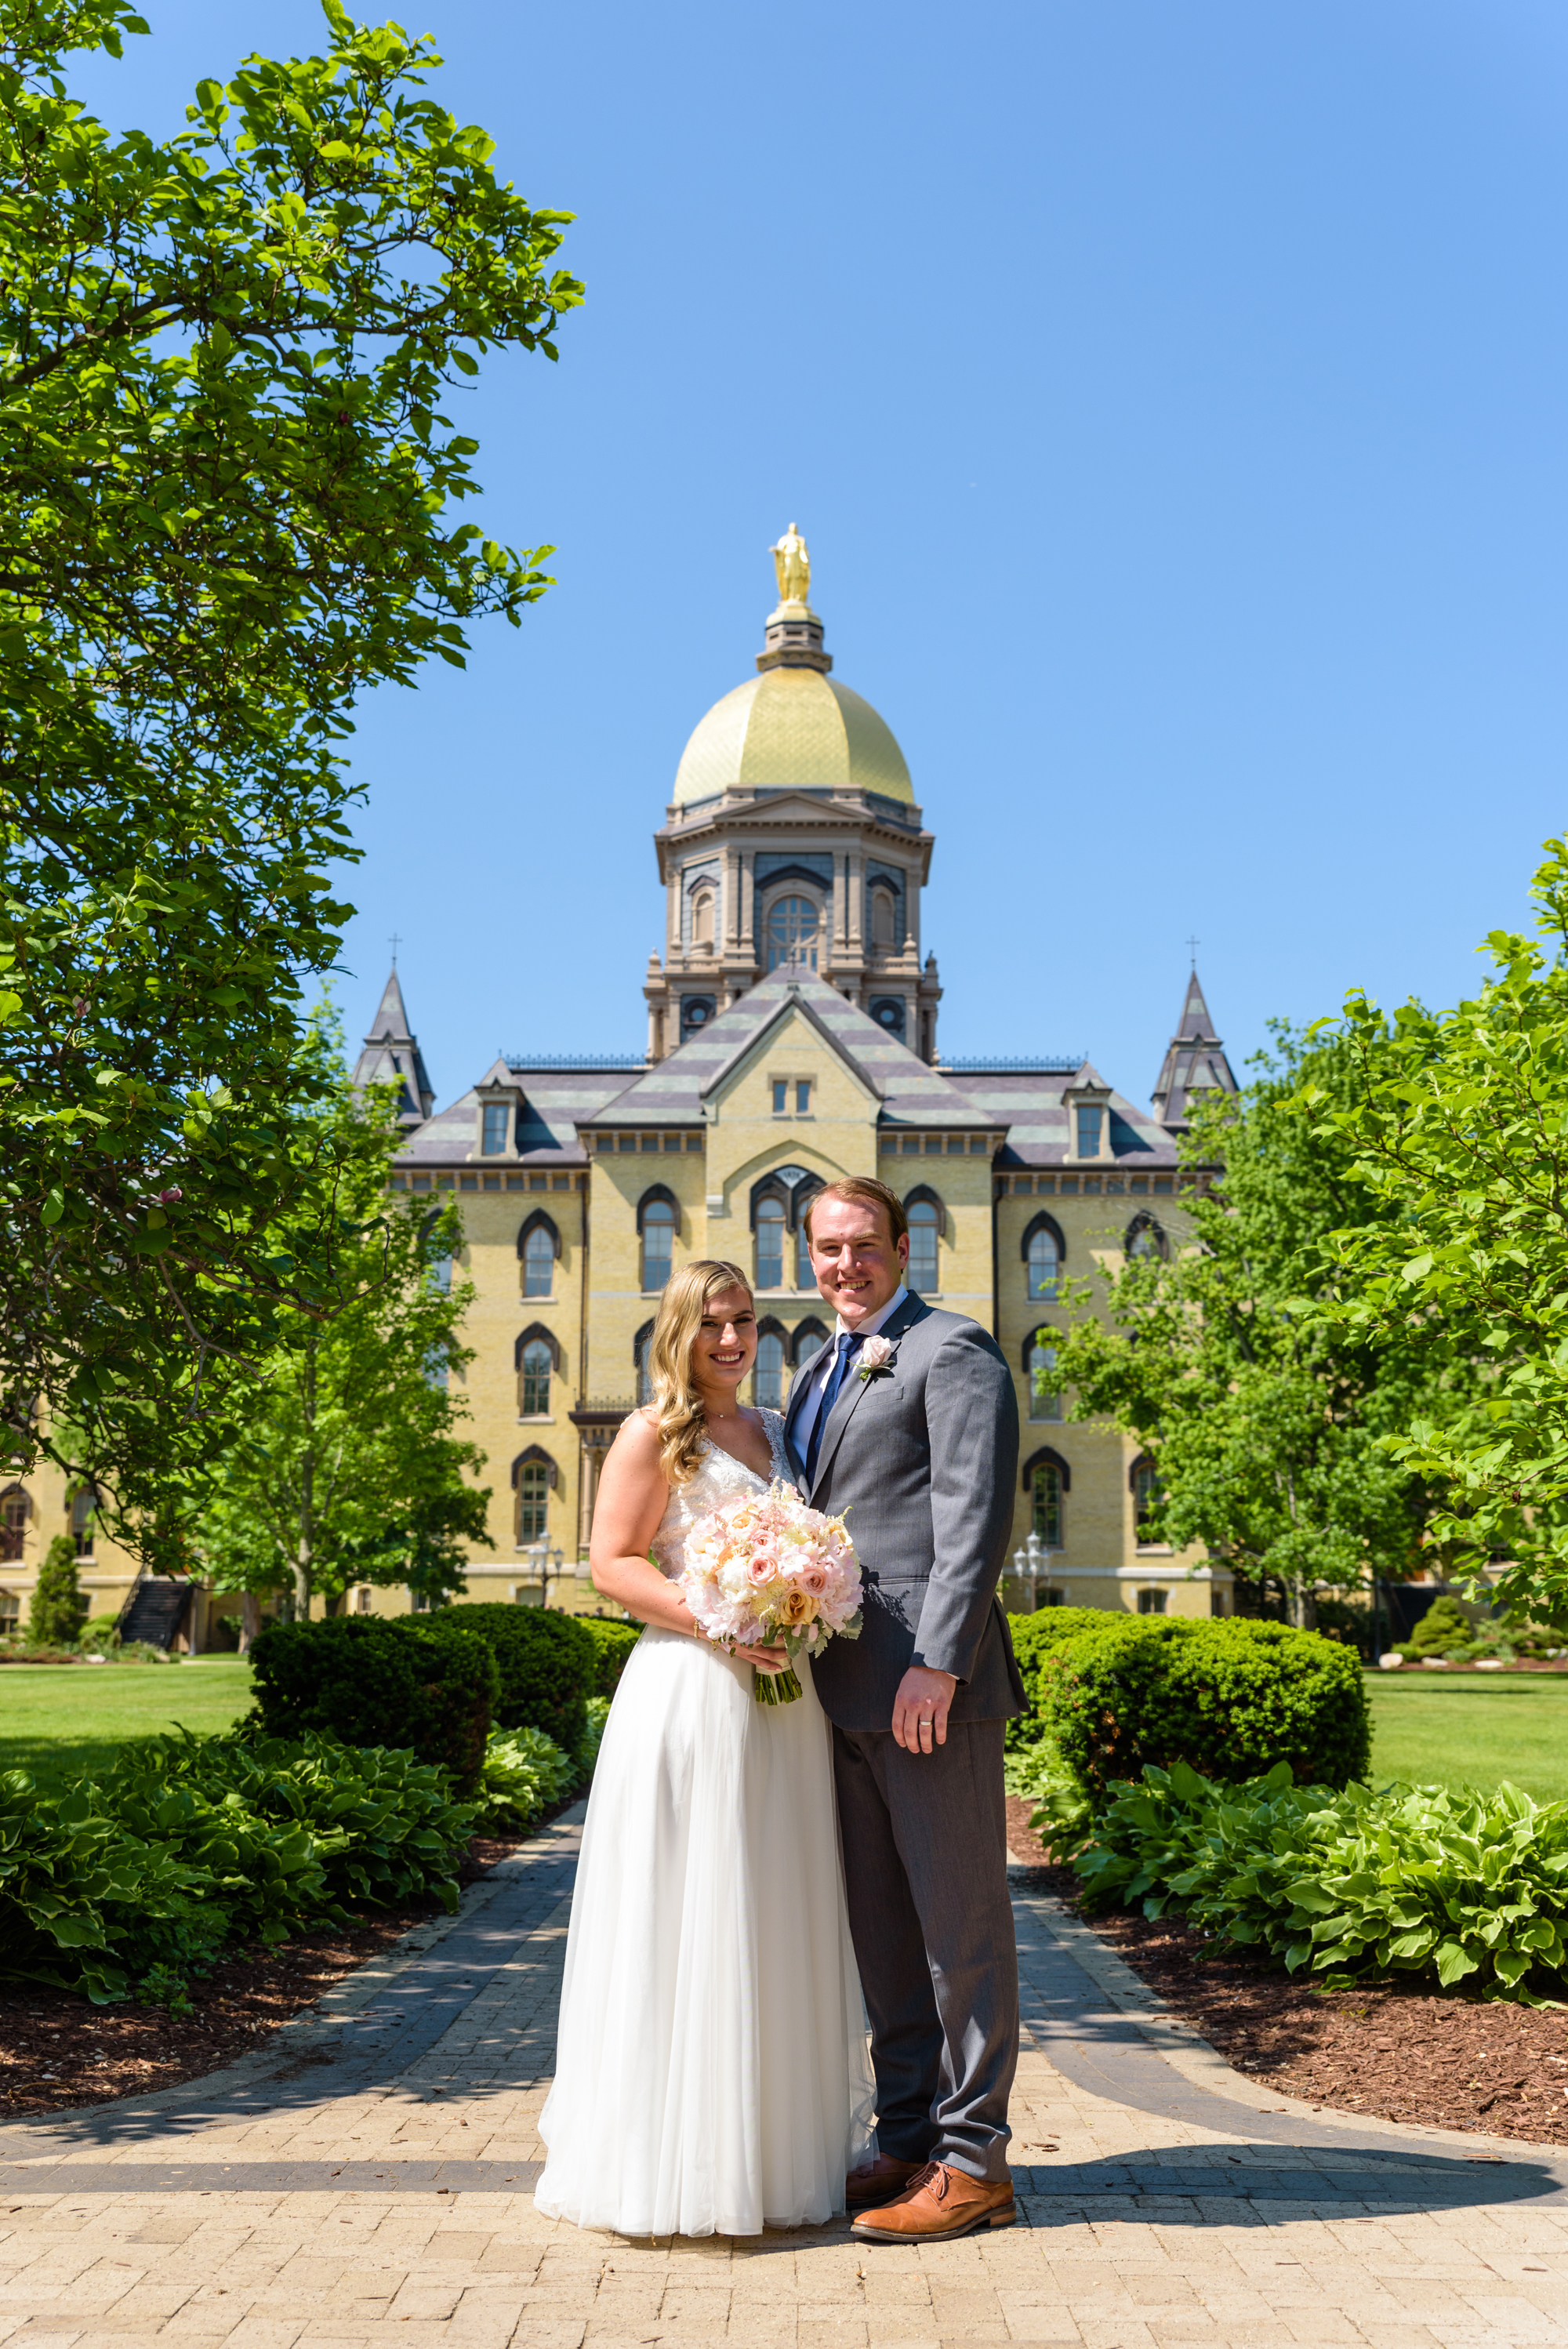 Bride & Groom in front of the Golden Dome after their ceremony at the Basilica of the Sacred Heart on the campus of Notre Dame